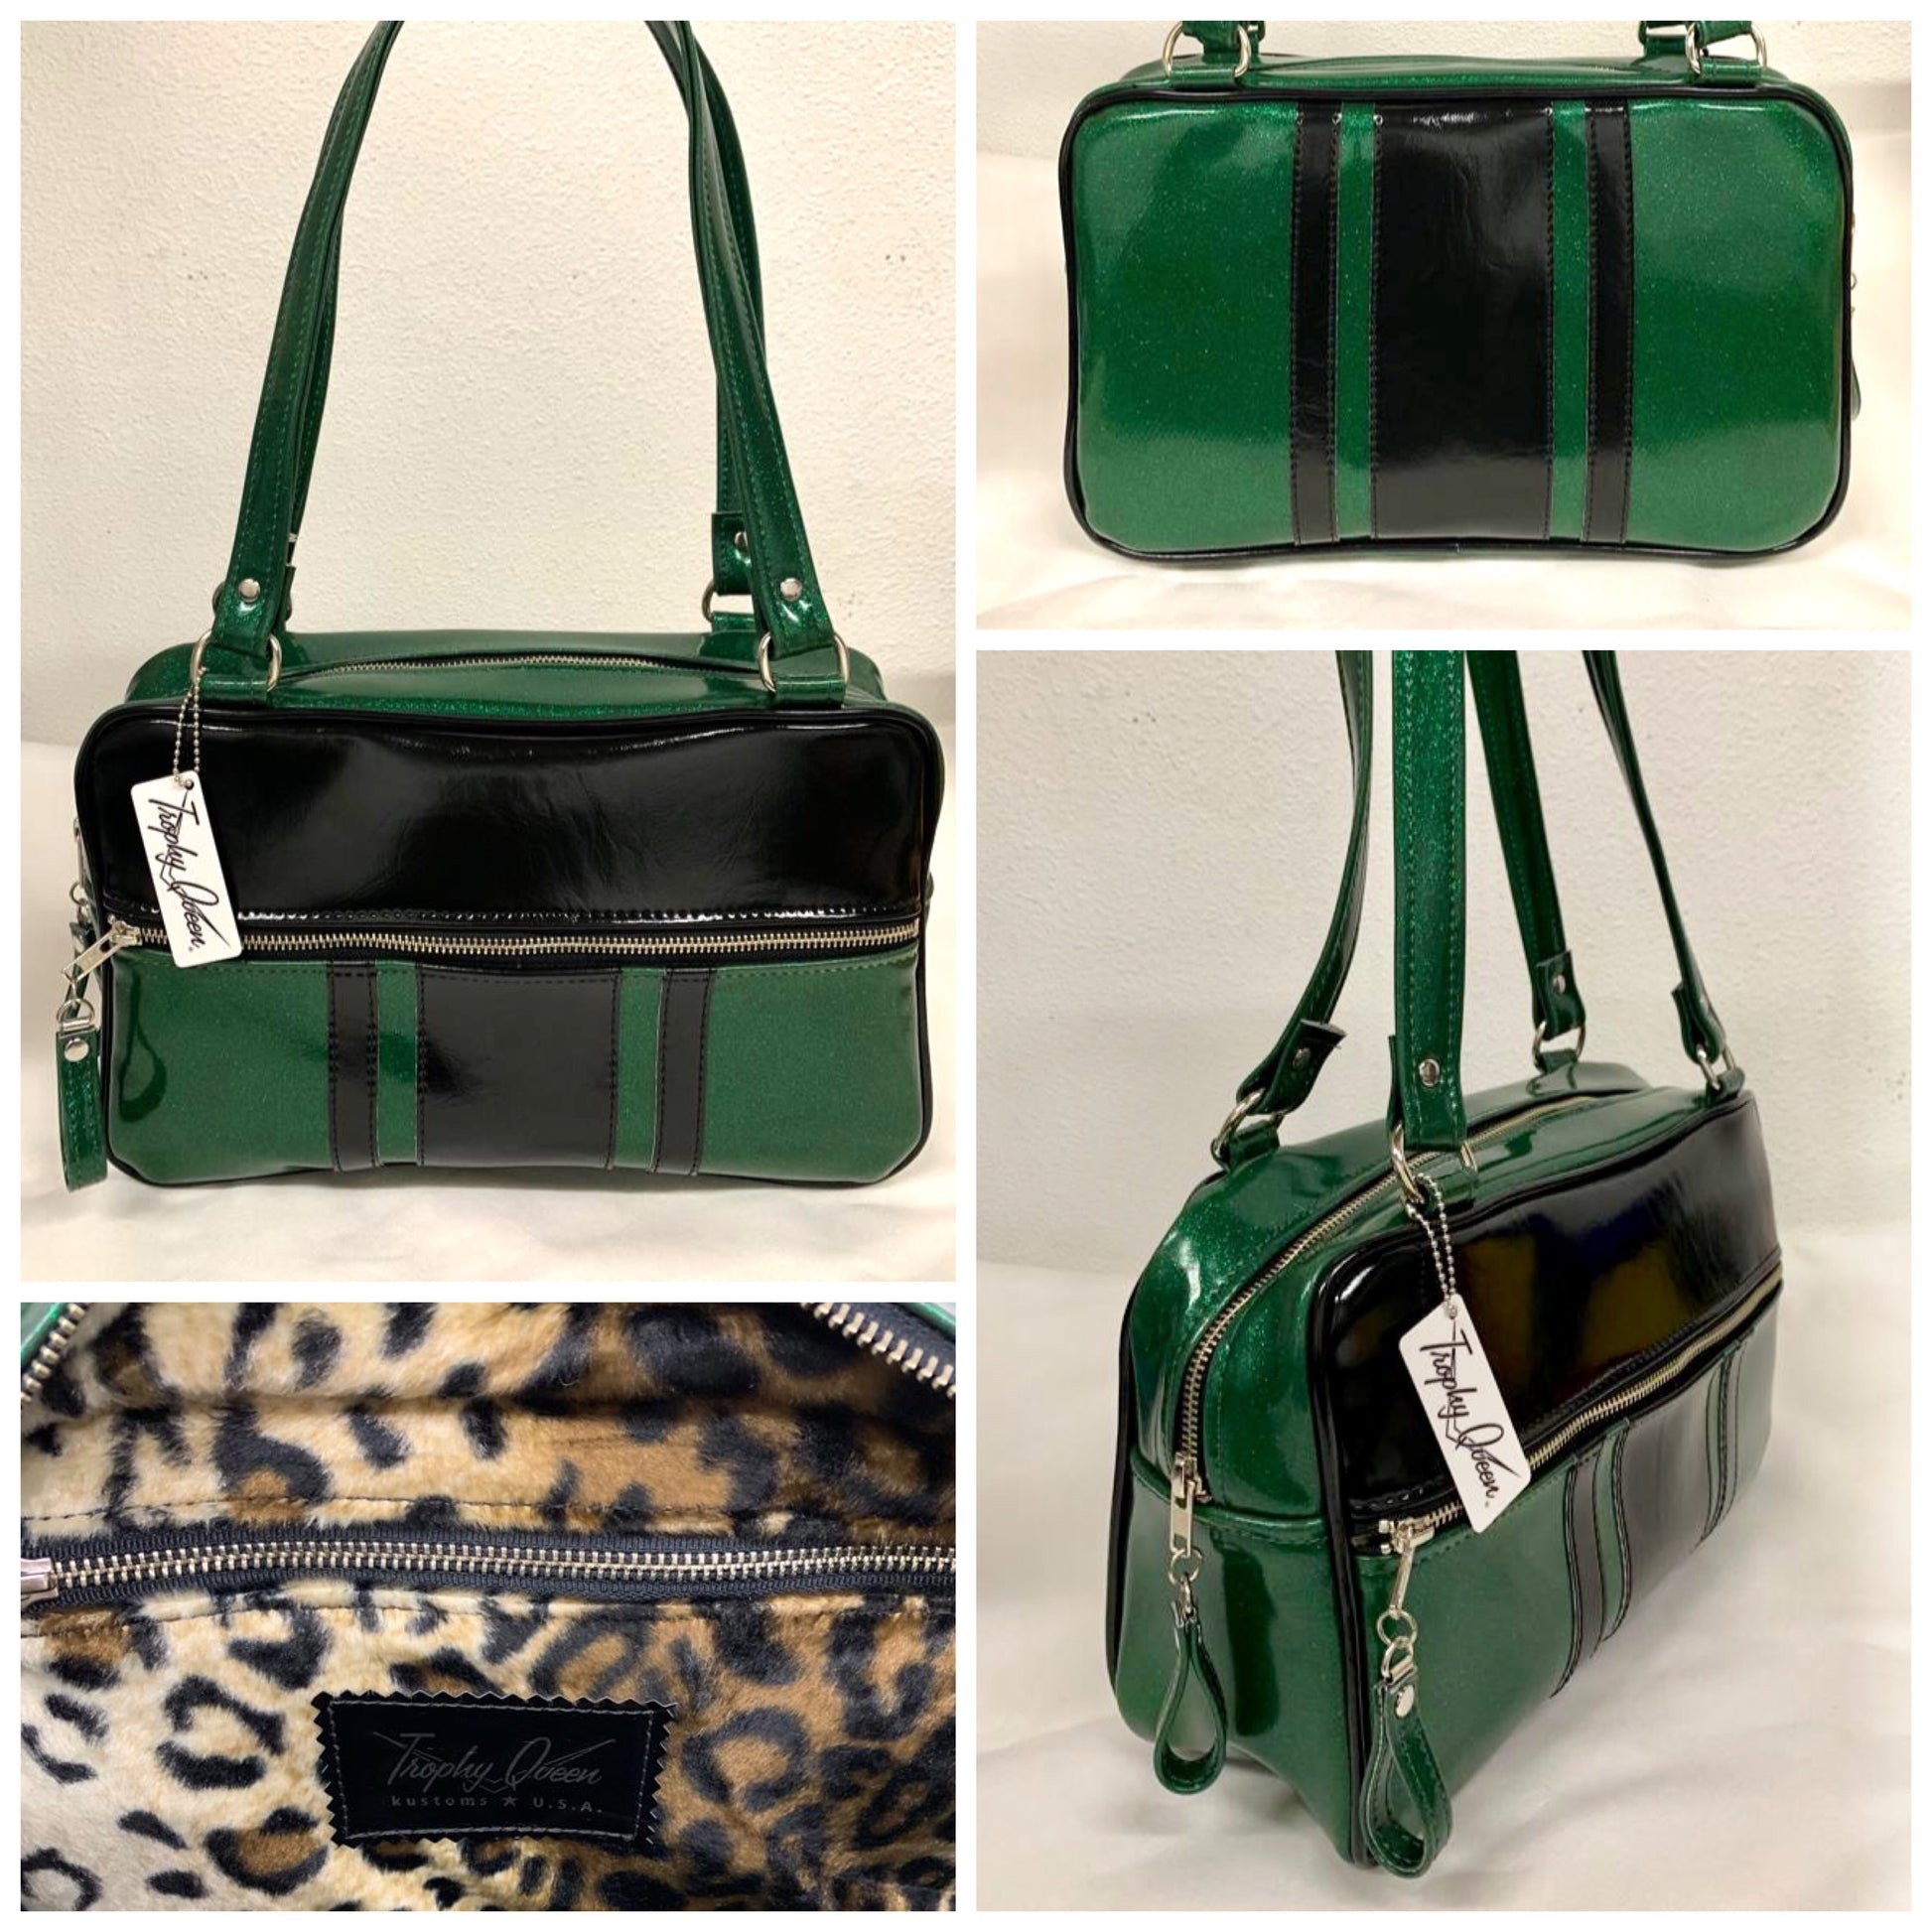 GTO Tote Bag - Green Glitter Vinyl / Grease Black Vinyl Stripes and Piping  - Leopard Lining